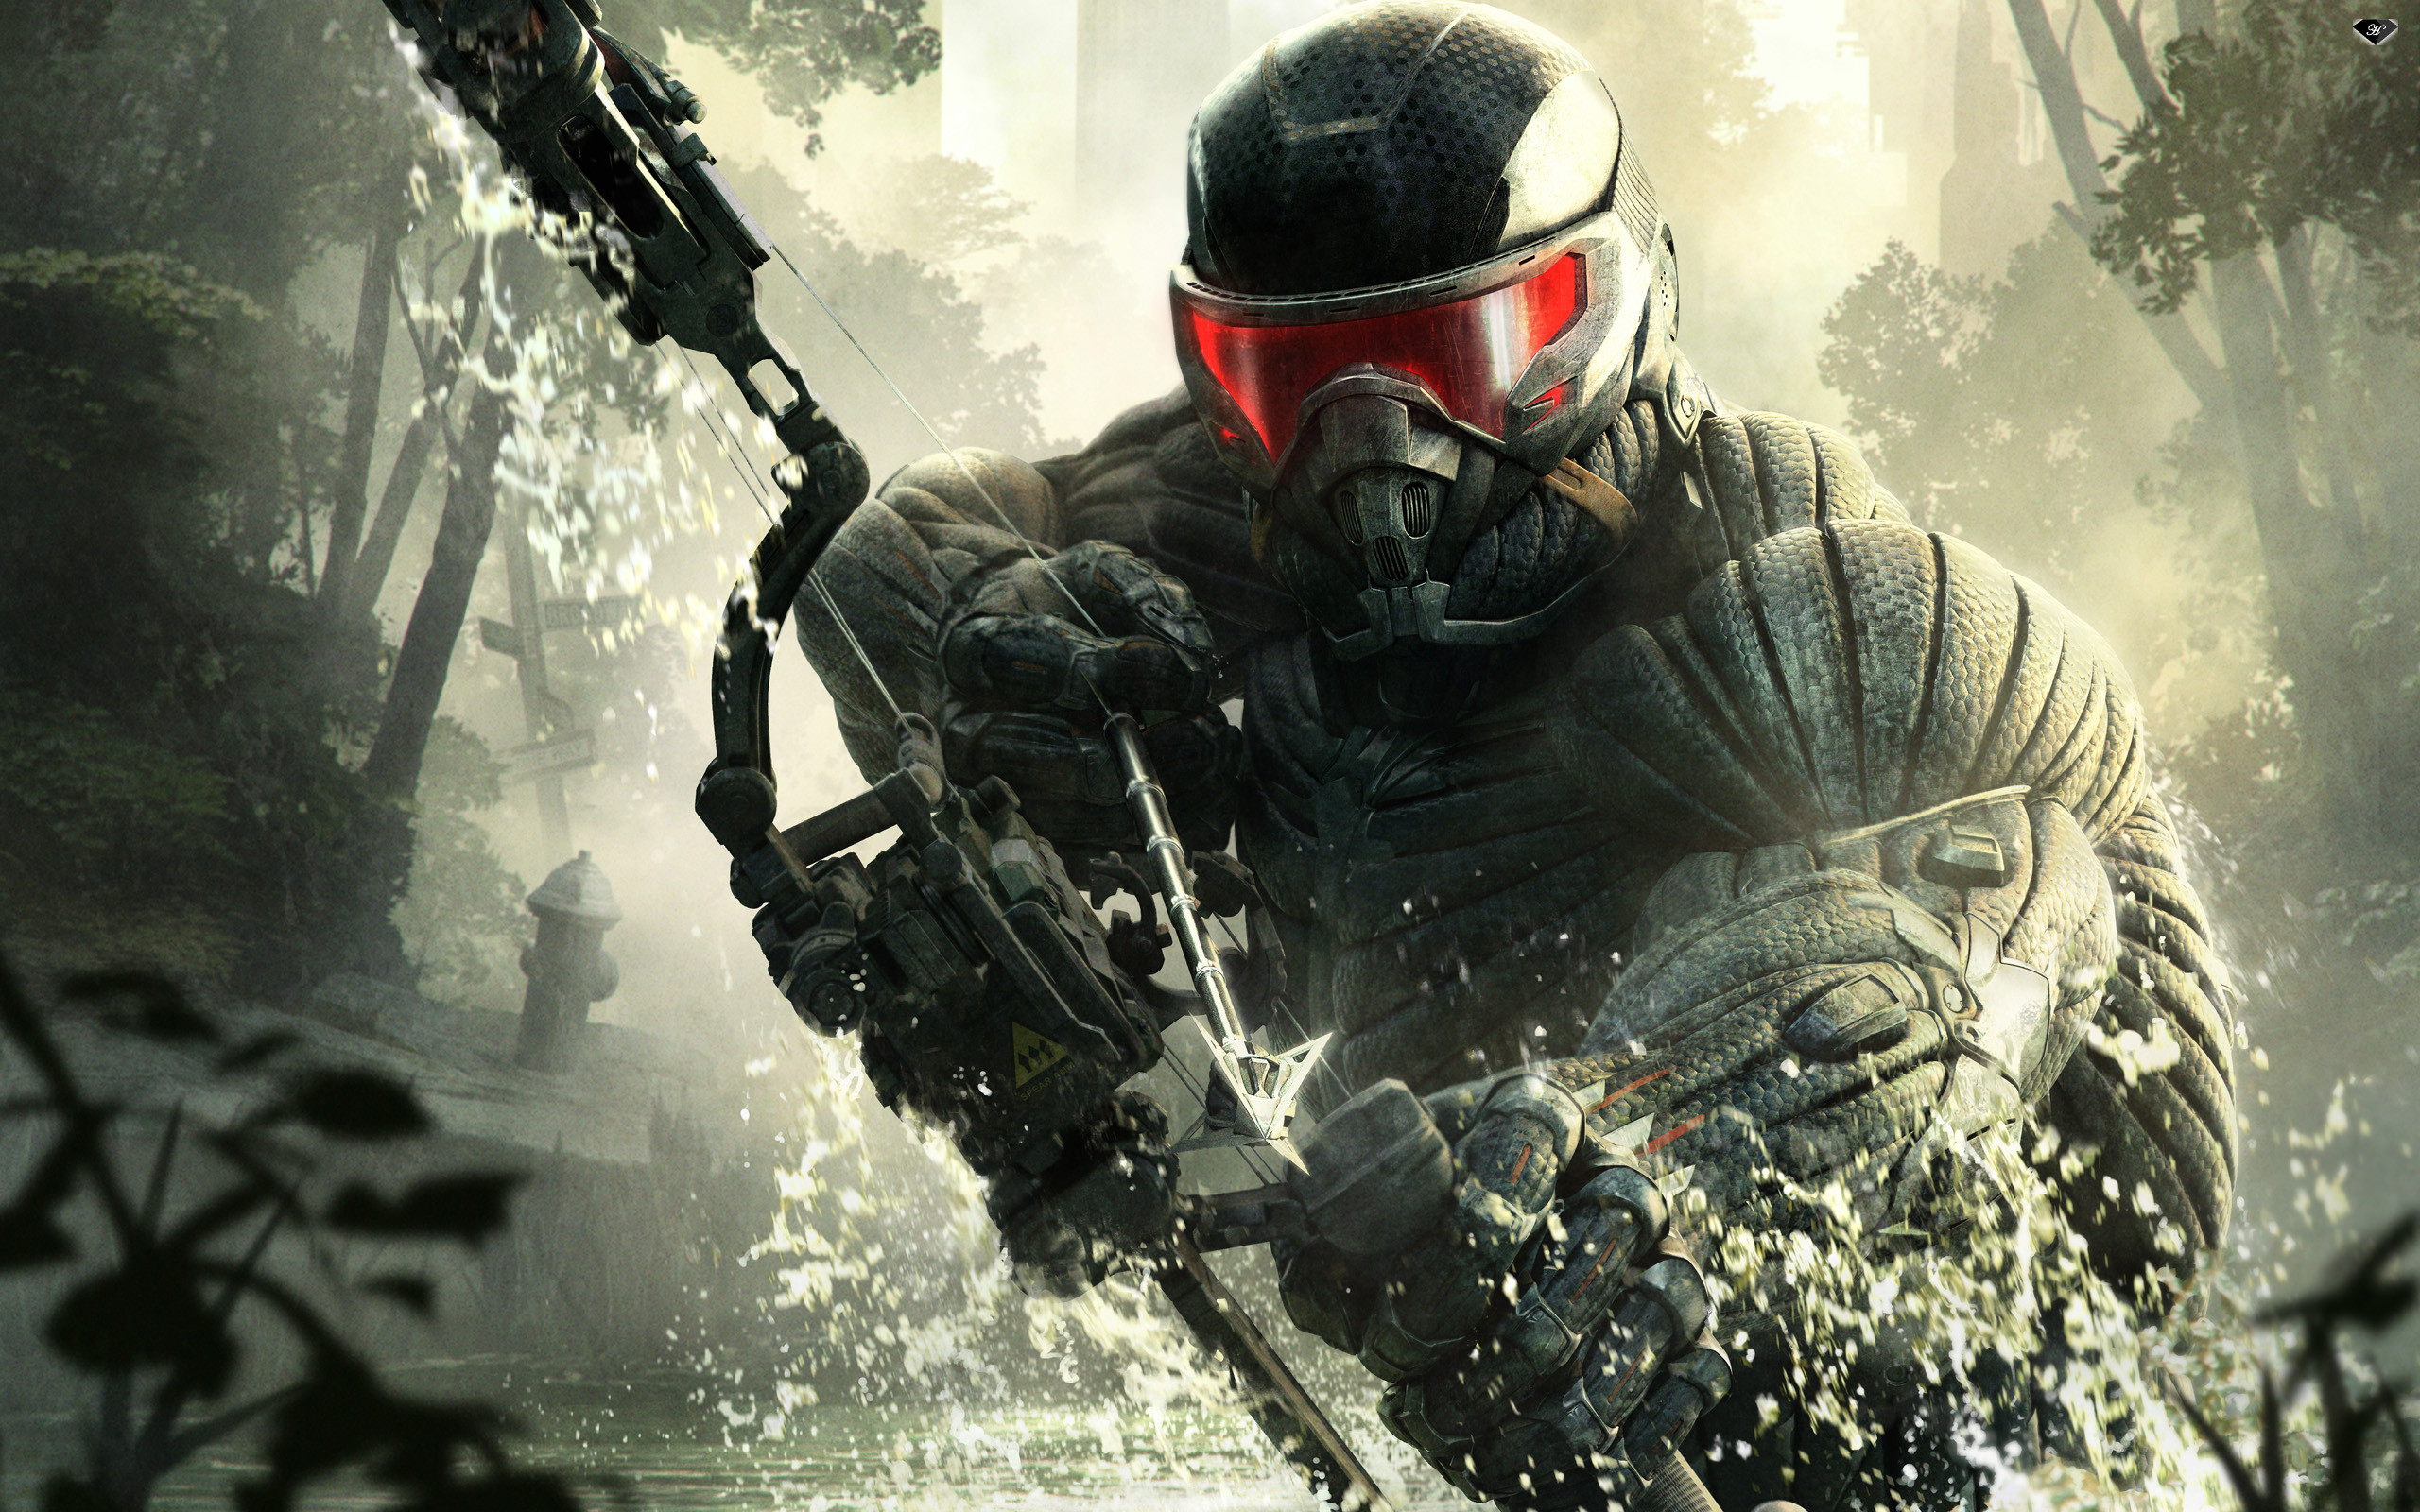 2560x1600 Crysis 3 Video Game Wallpapers | HD Wallpapers